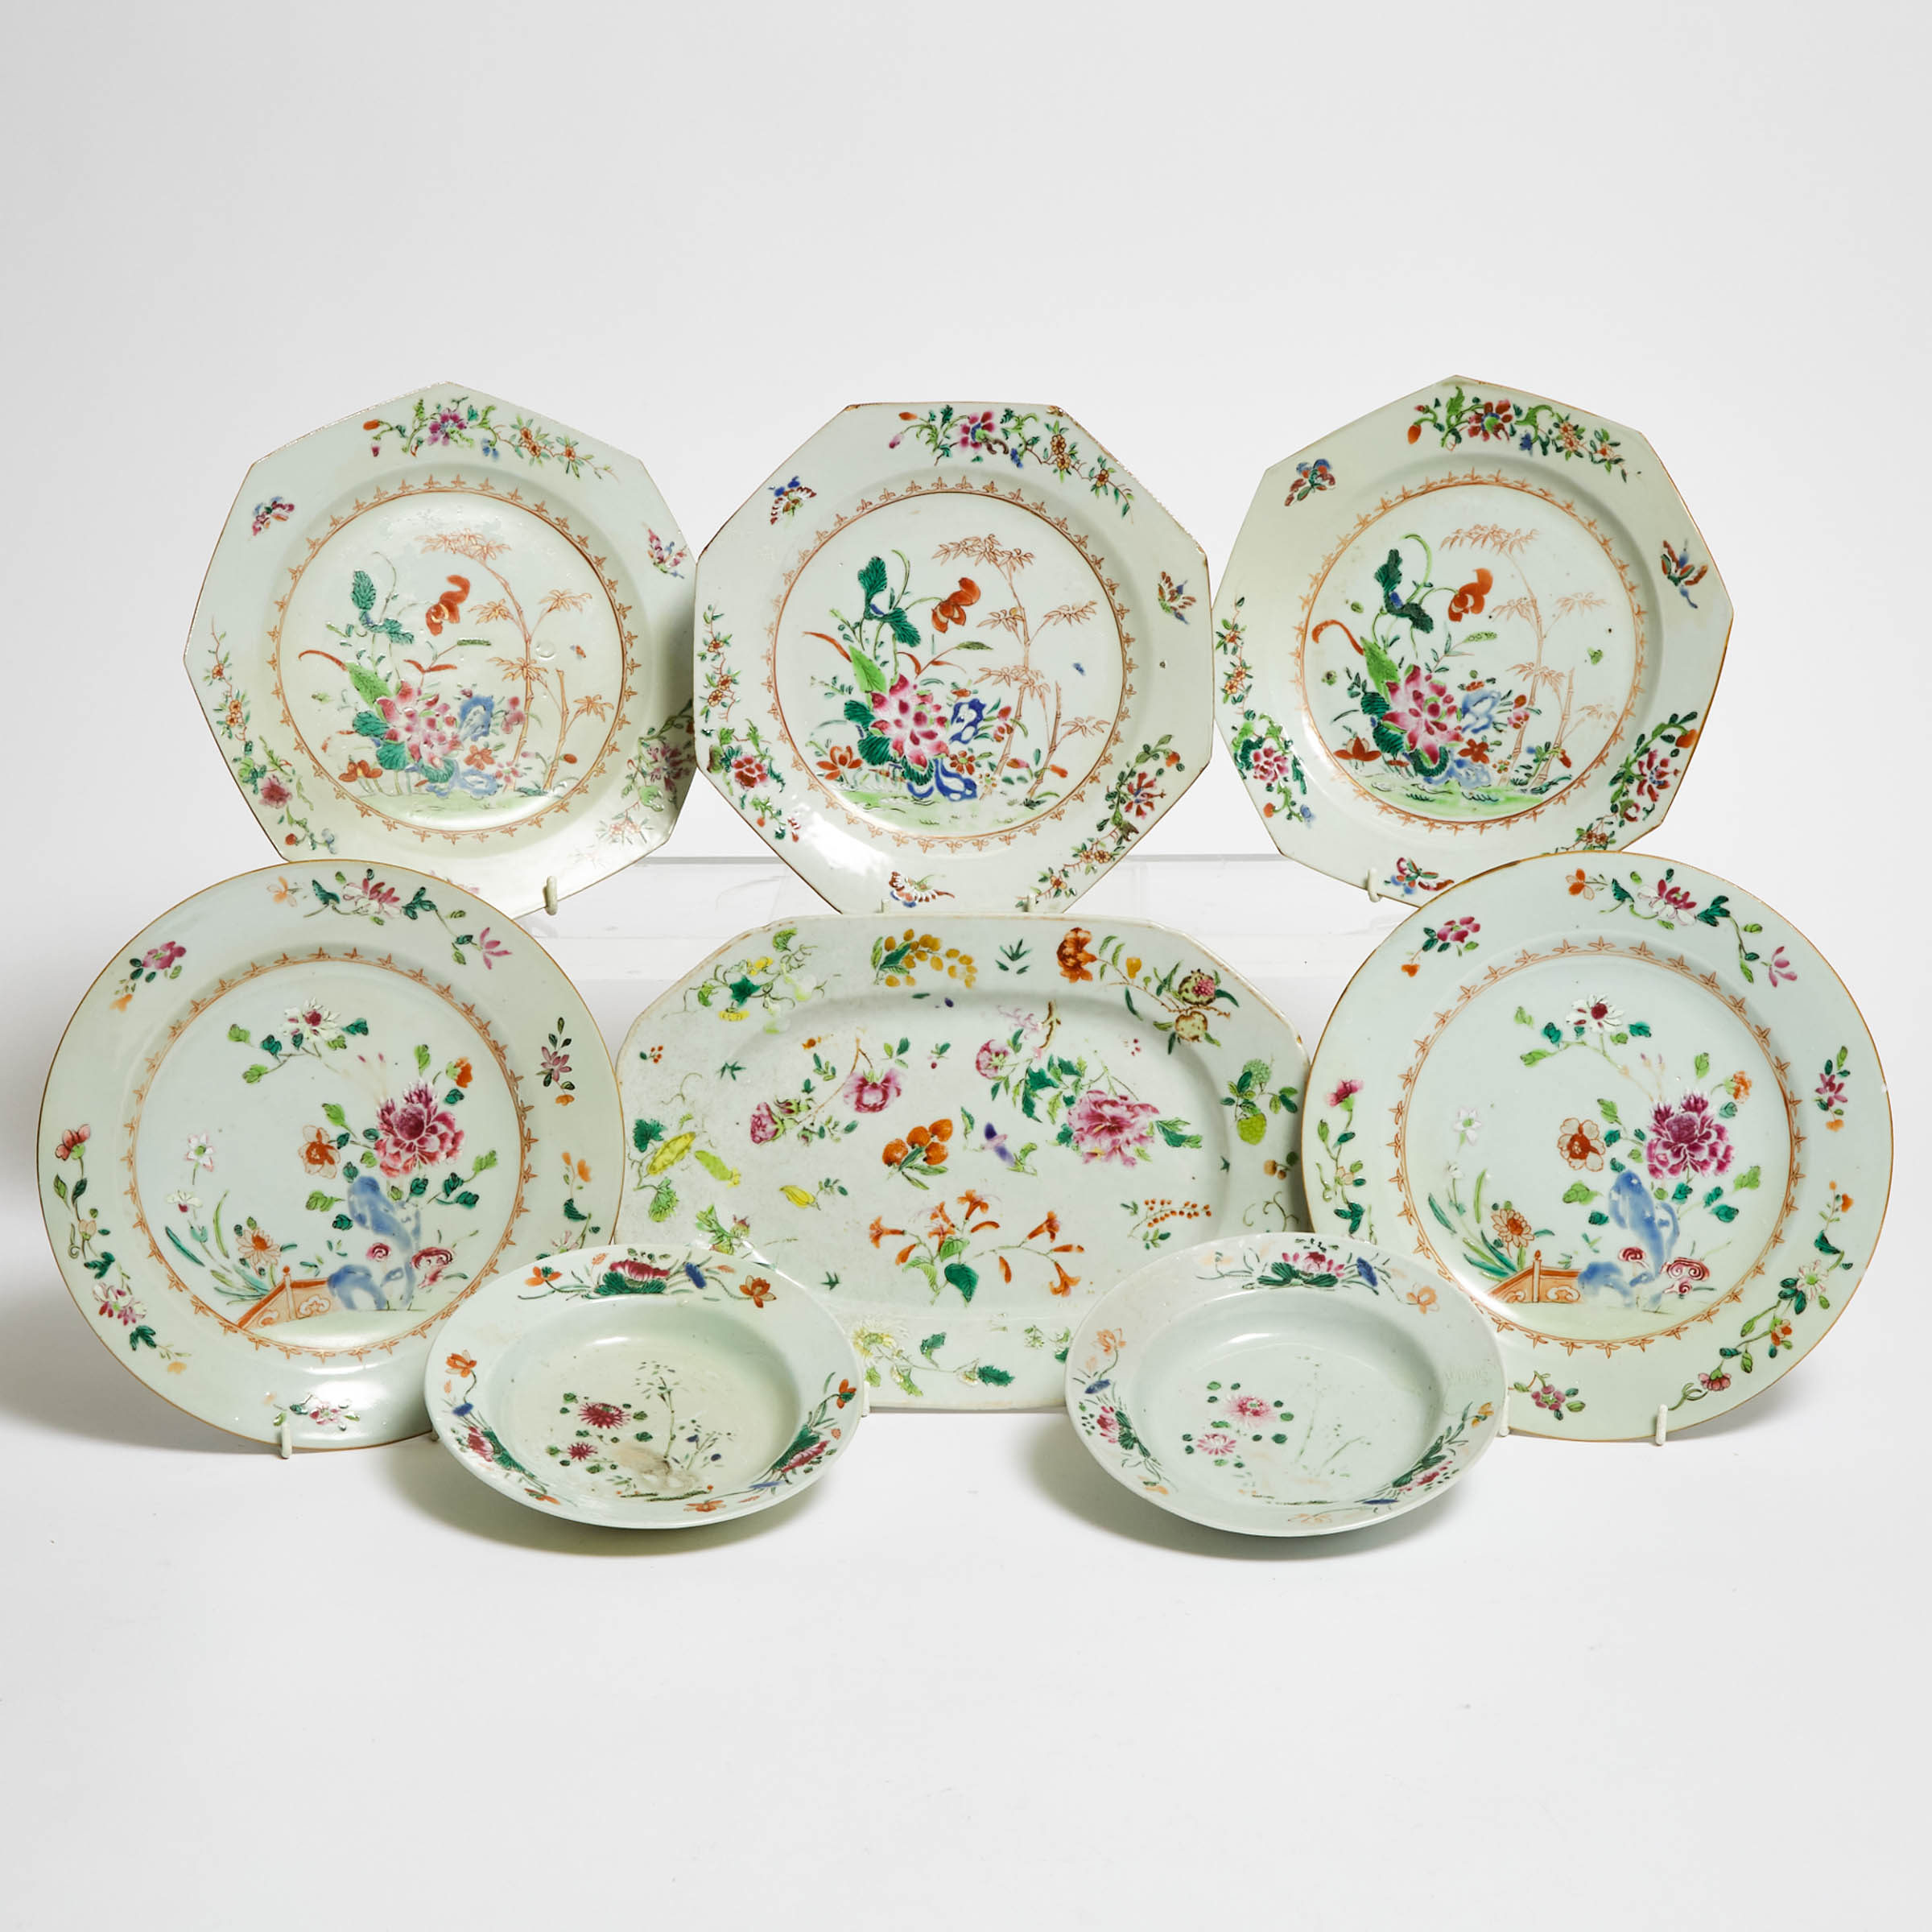 A Group of Eight Chinese Export Famille Rose Dishes, 18th Century